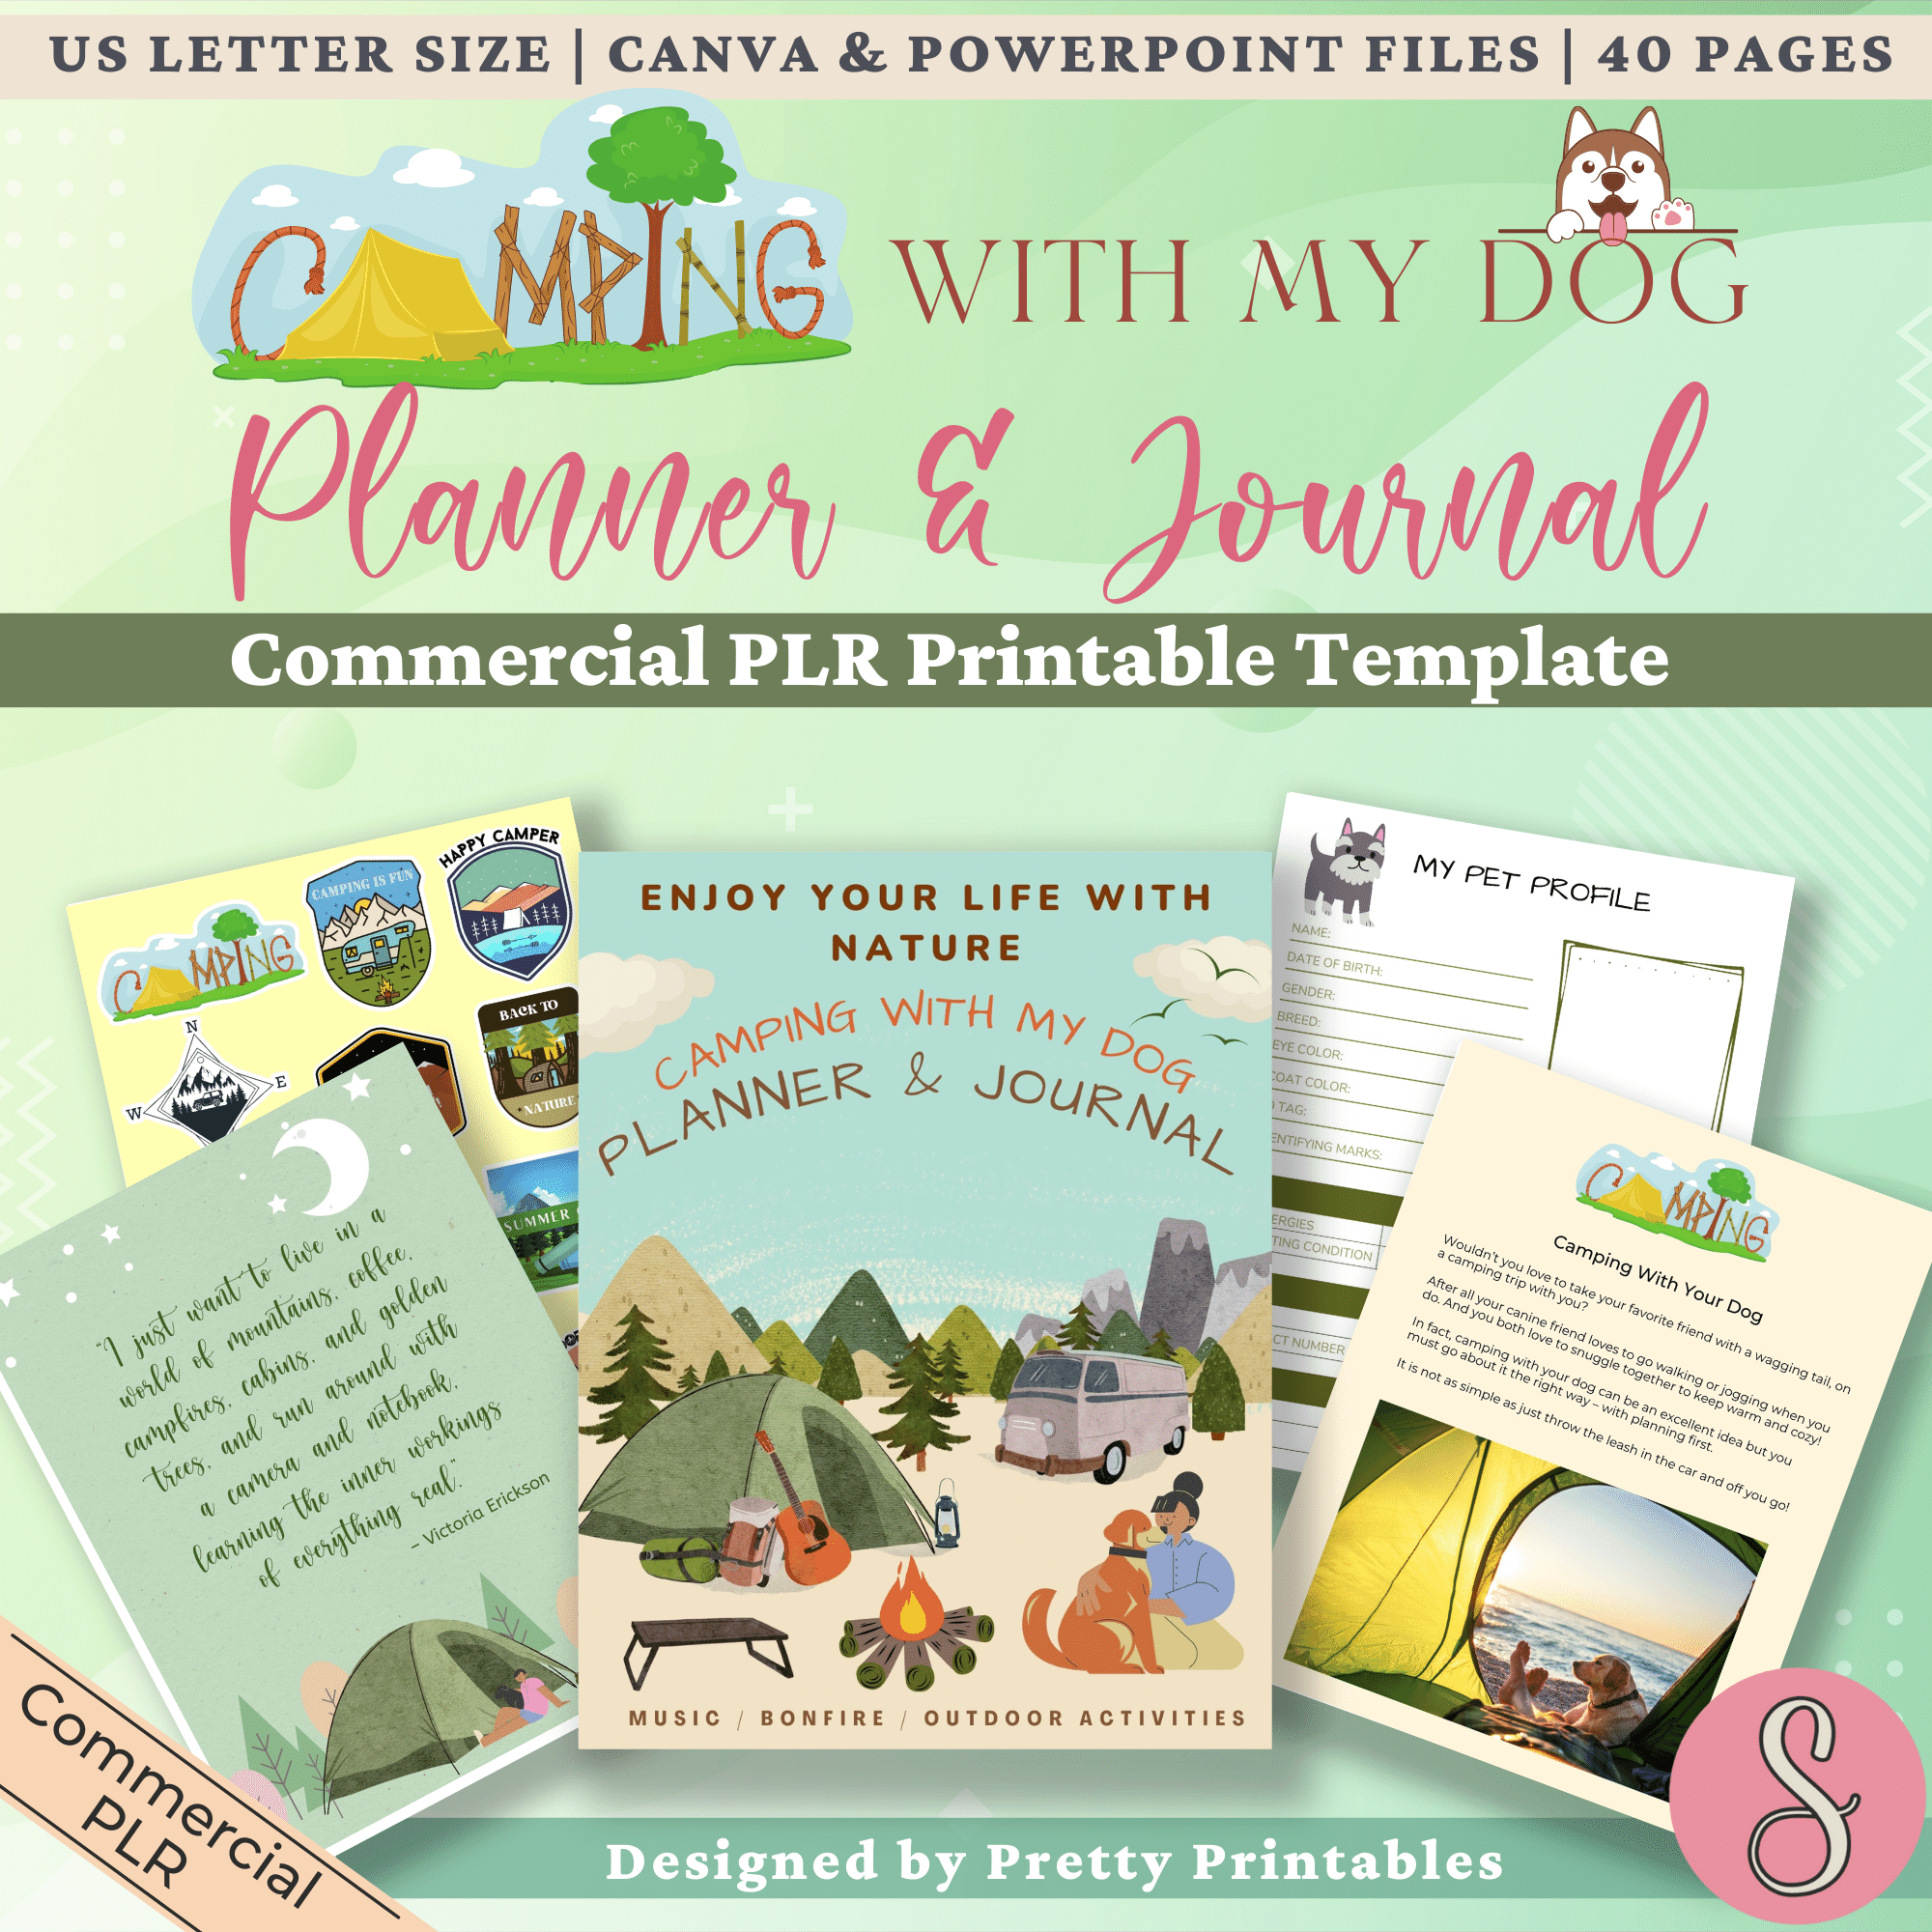 Camping with my Dog Planner & Journal Commercial PLR Printable Template